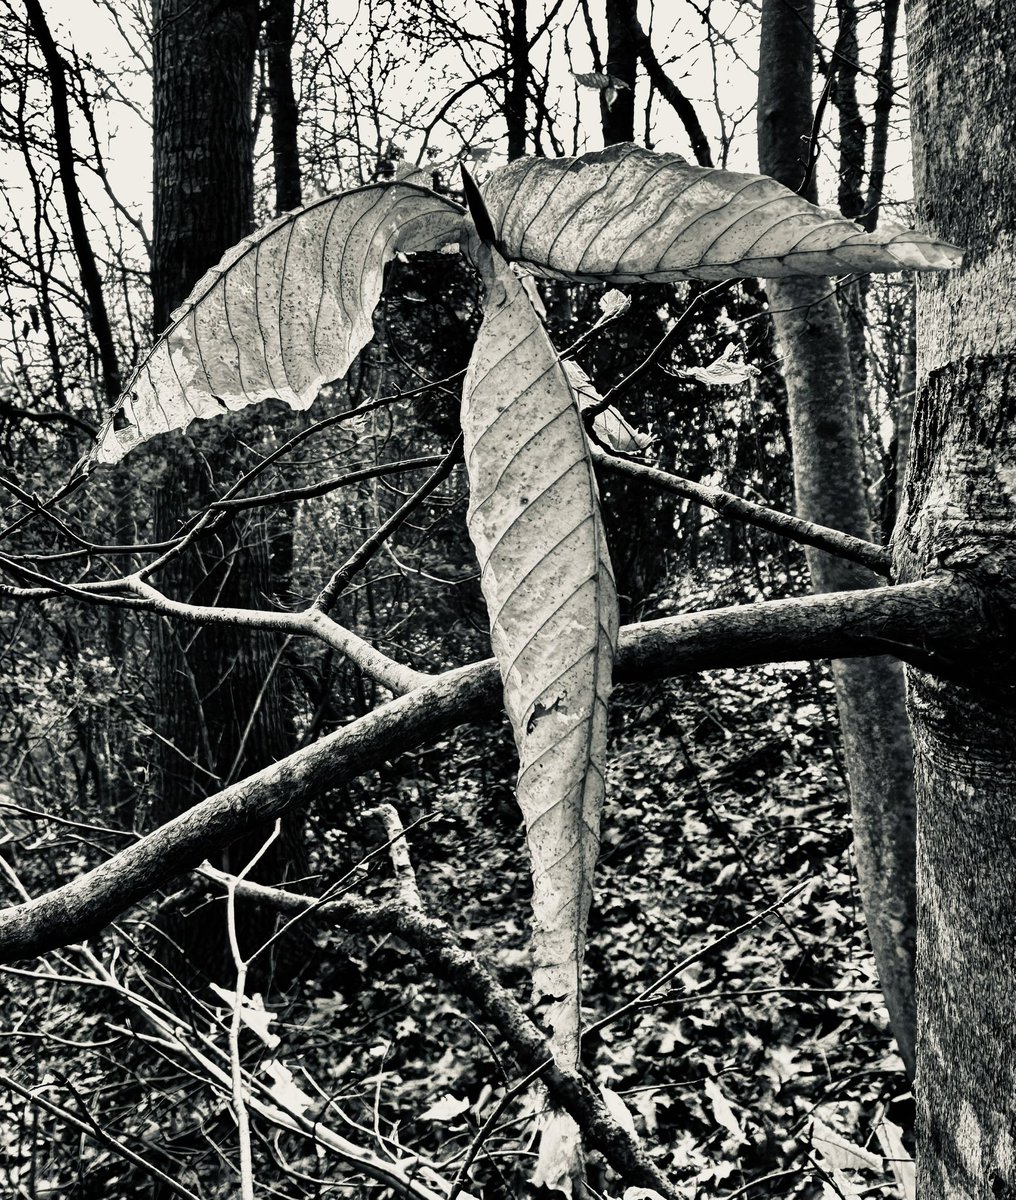 only the quietest secrets of the long winter - remain deep in the woods marcescent whispers hang frail on boughs to be there and still - is to know where we’ve been they know each of the seasons - know all of them well